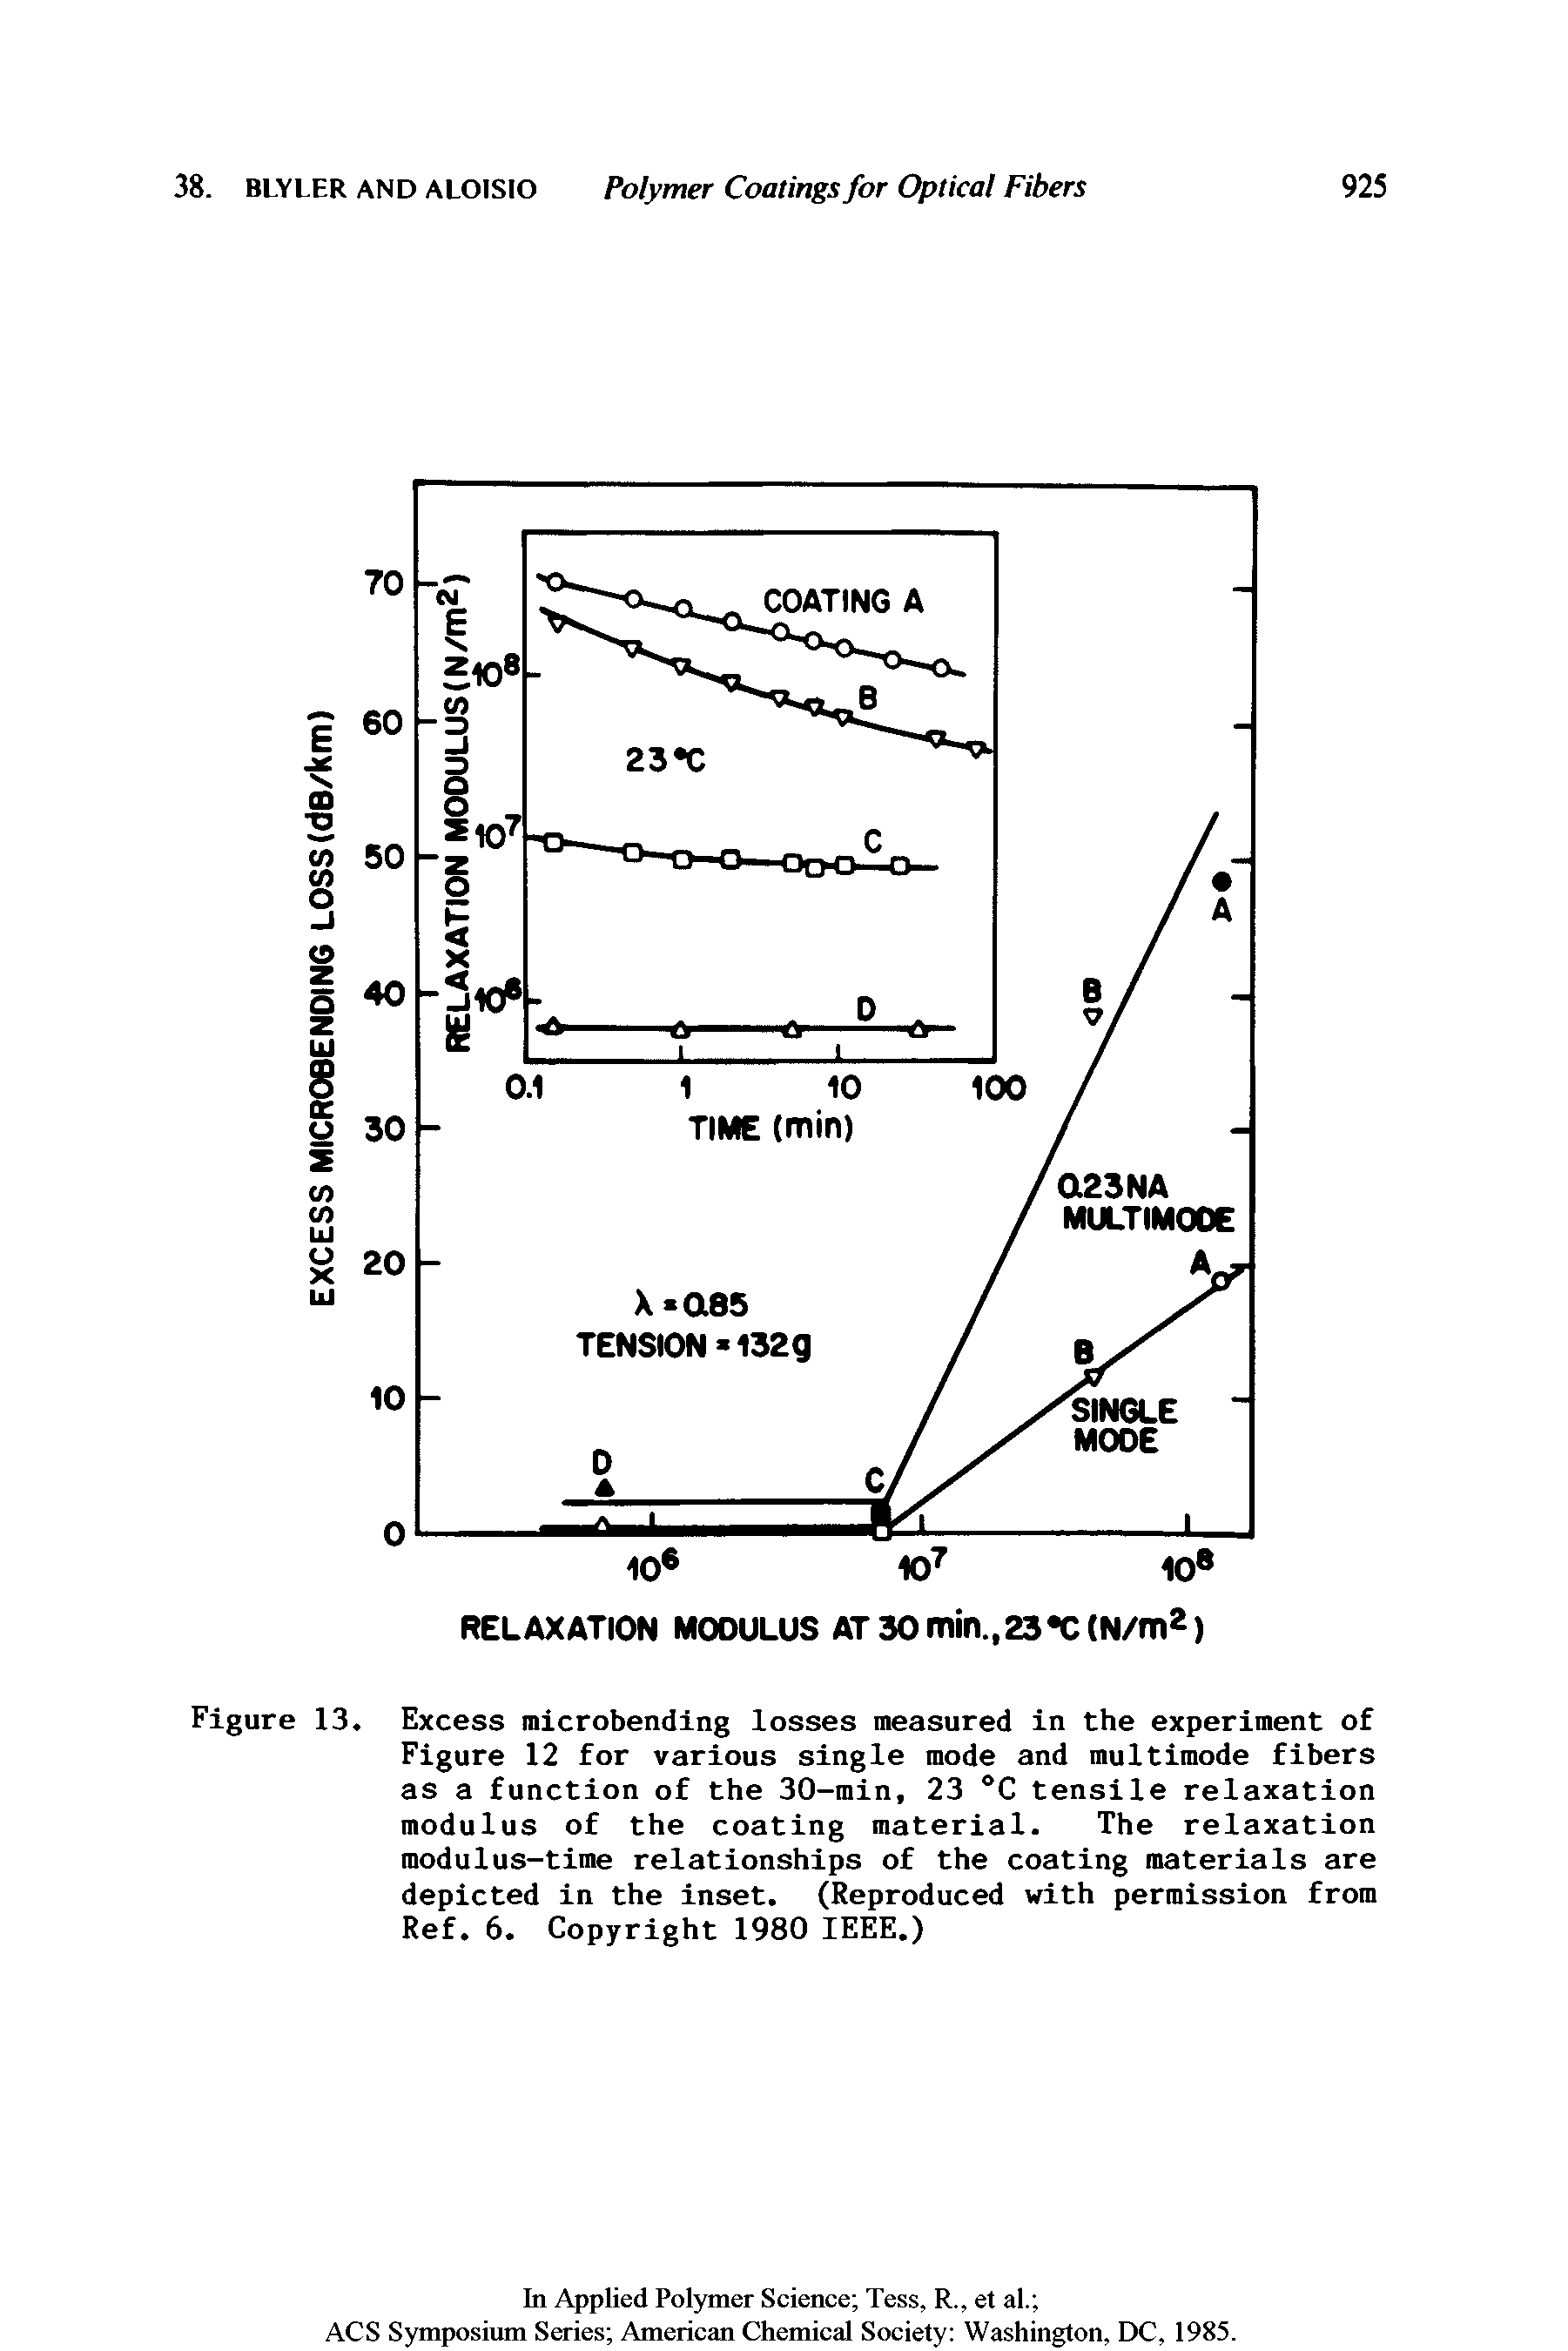 Figure 13. Excess microbending losses measured in the experiment of Figure 12 for various single mode and multimode fibers as a function of the 30-min, 23 °C tensile relaxation modulus of the coating material. The relaxation modulus-time relationships of the coating materials are depicted in the inset. (Reproduced with permission from Ref. 6. Copyright 1980 IEEE.)...